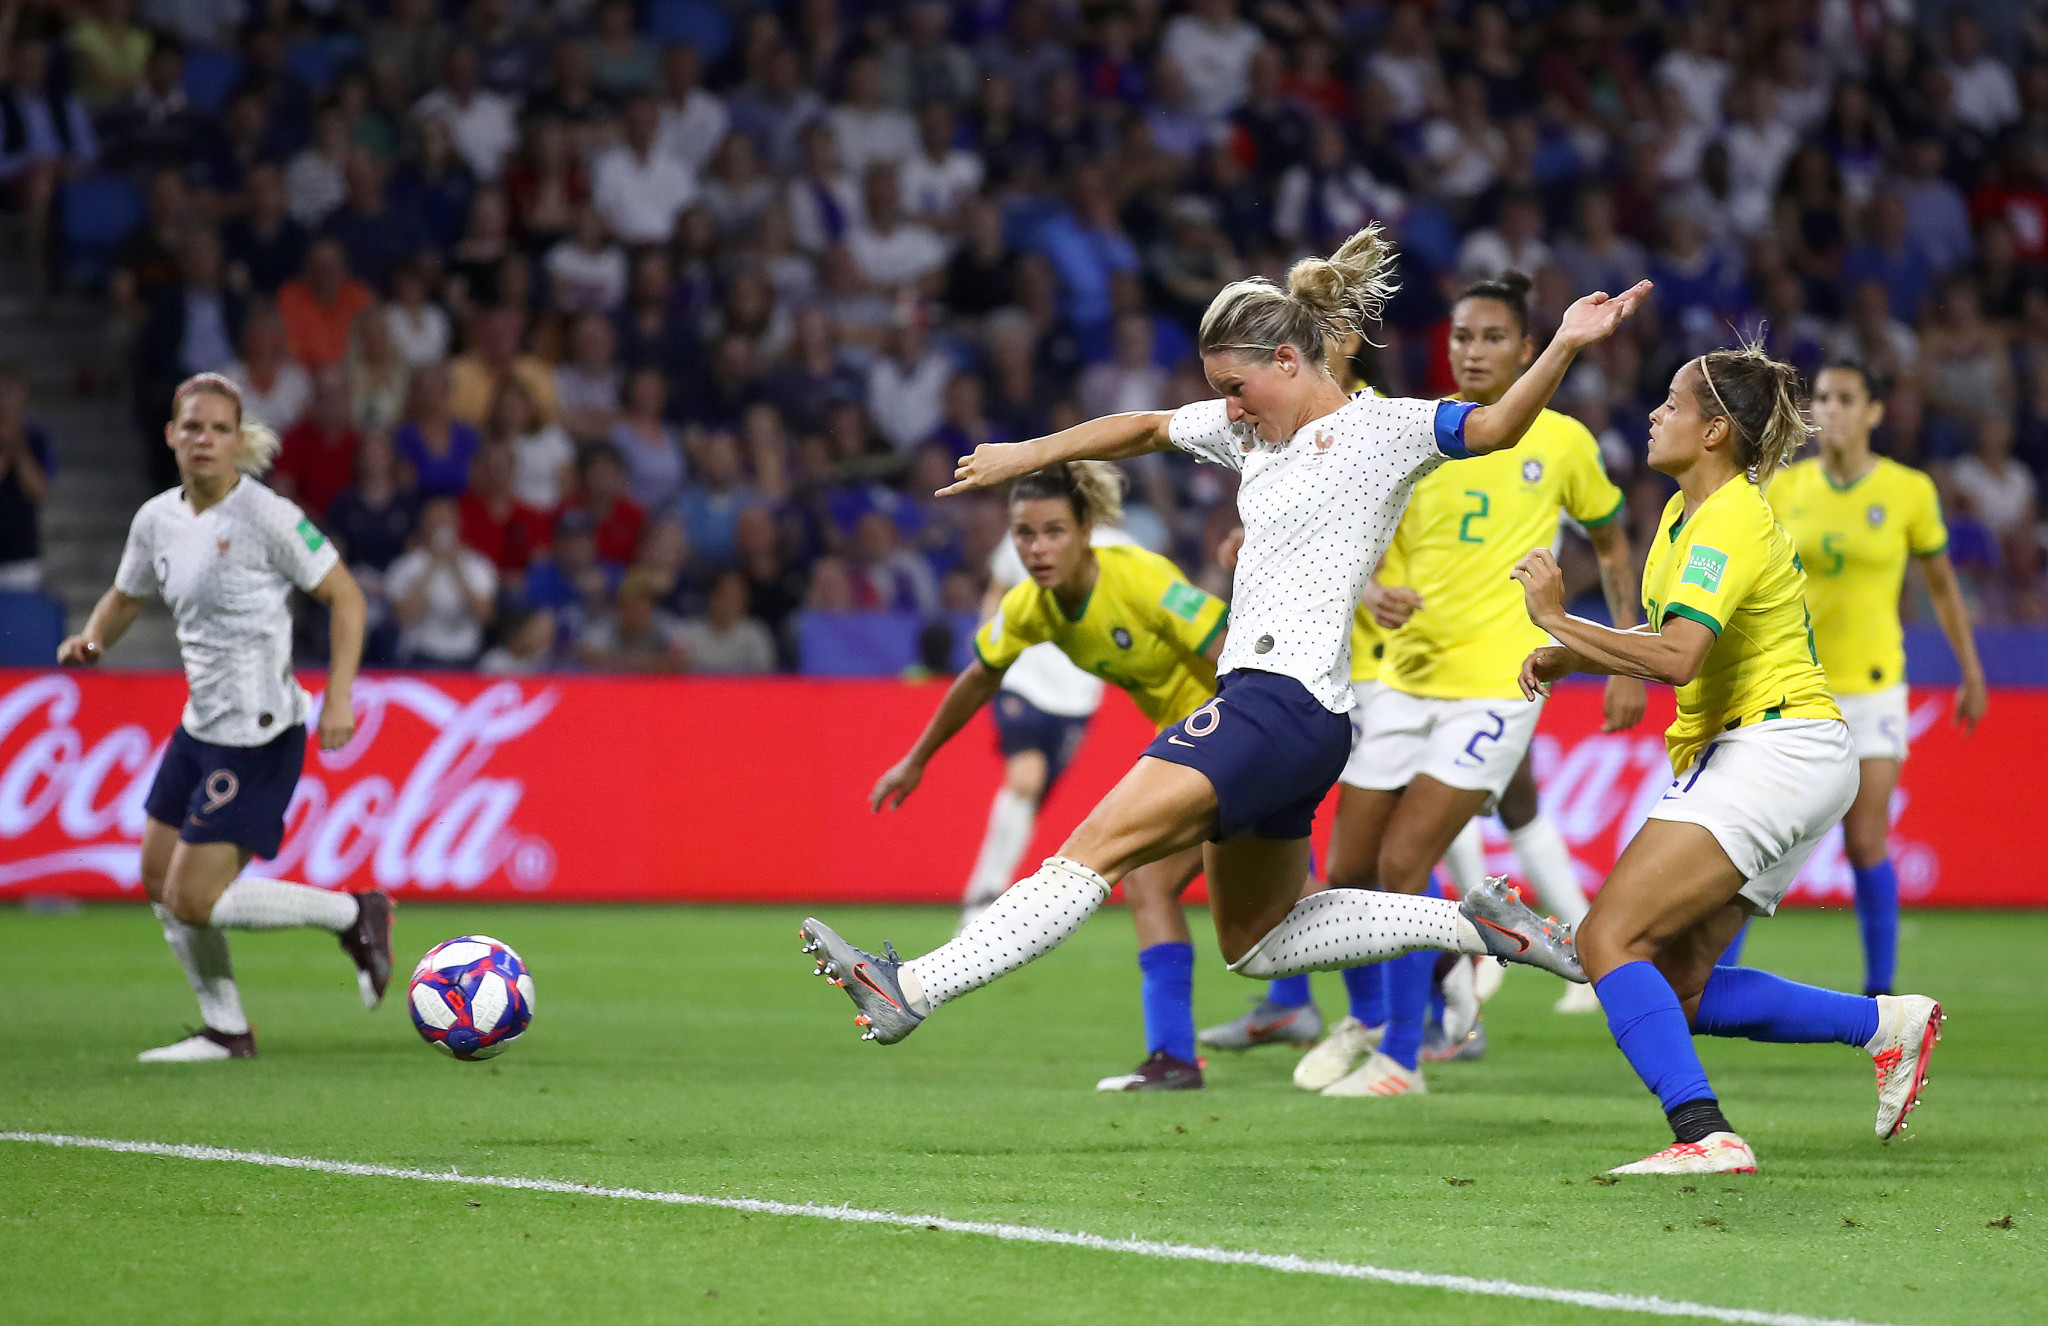 Hosts France battle past Brazil in FIFA Women's World Cup after England beat bad-tempered Cameroon